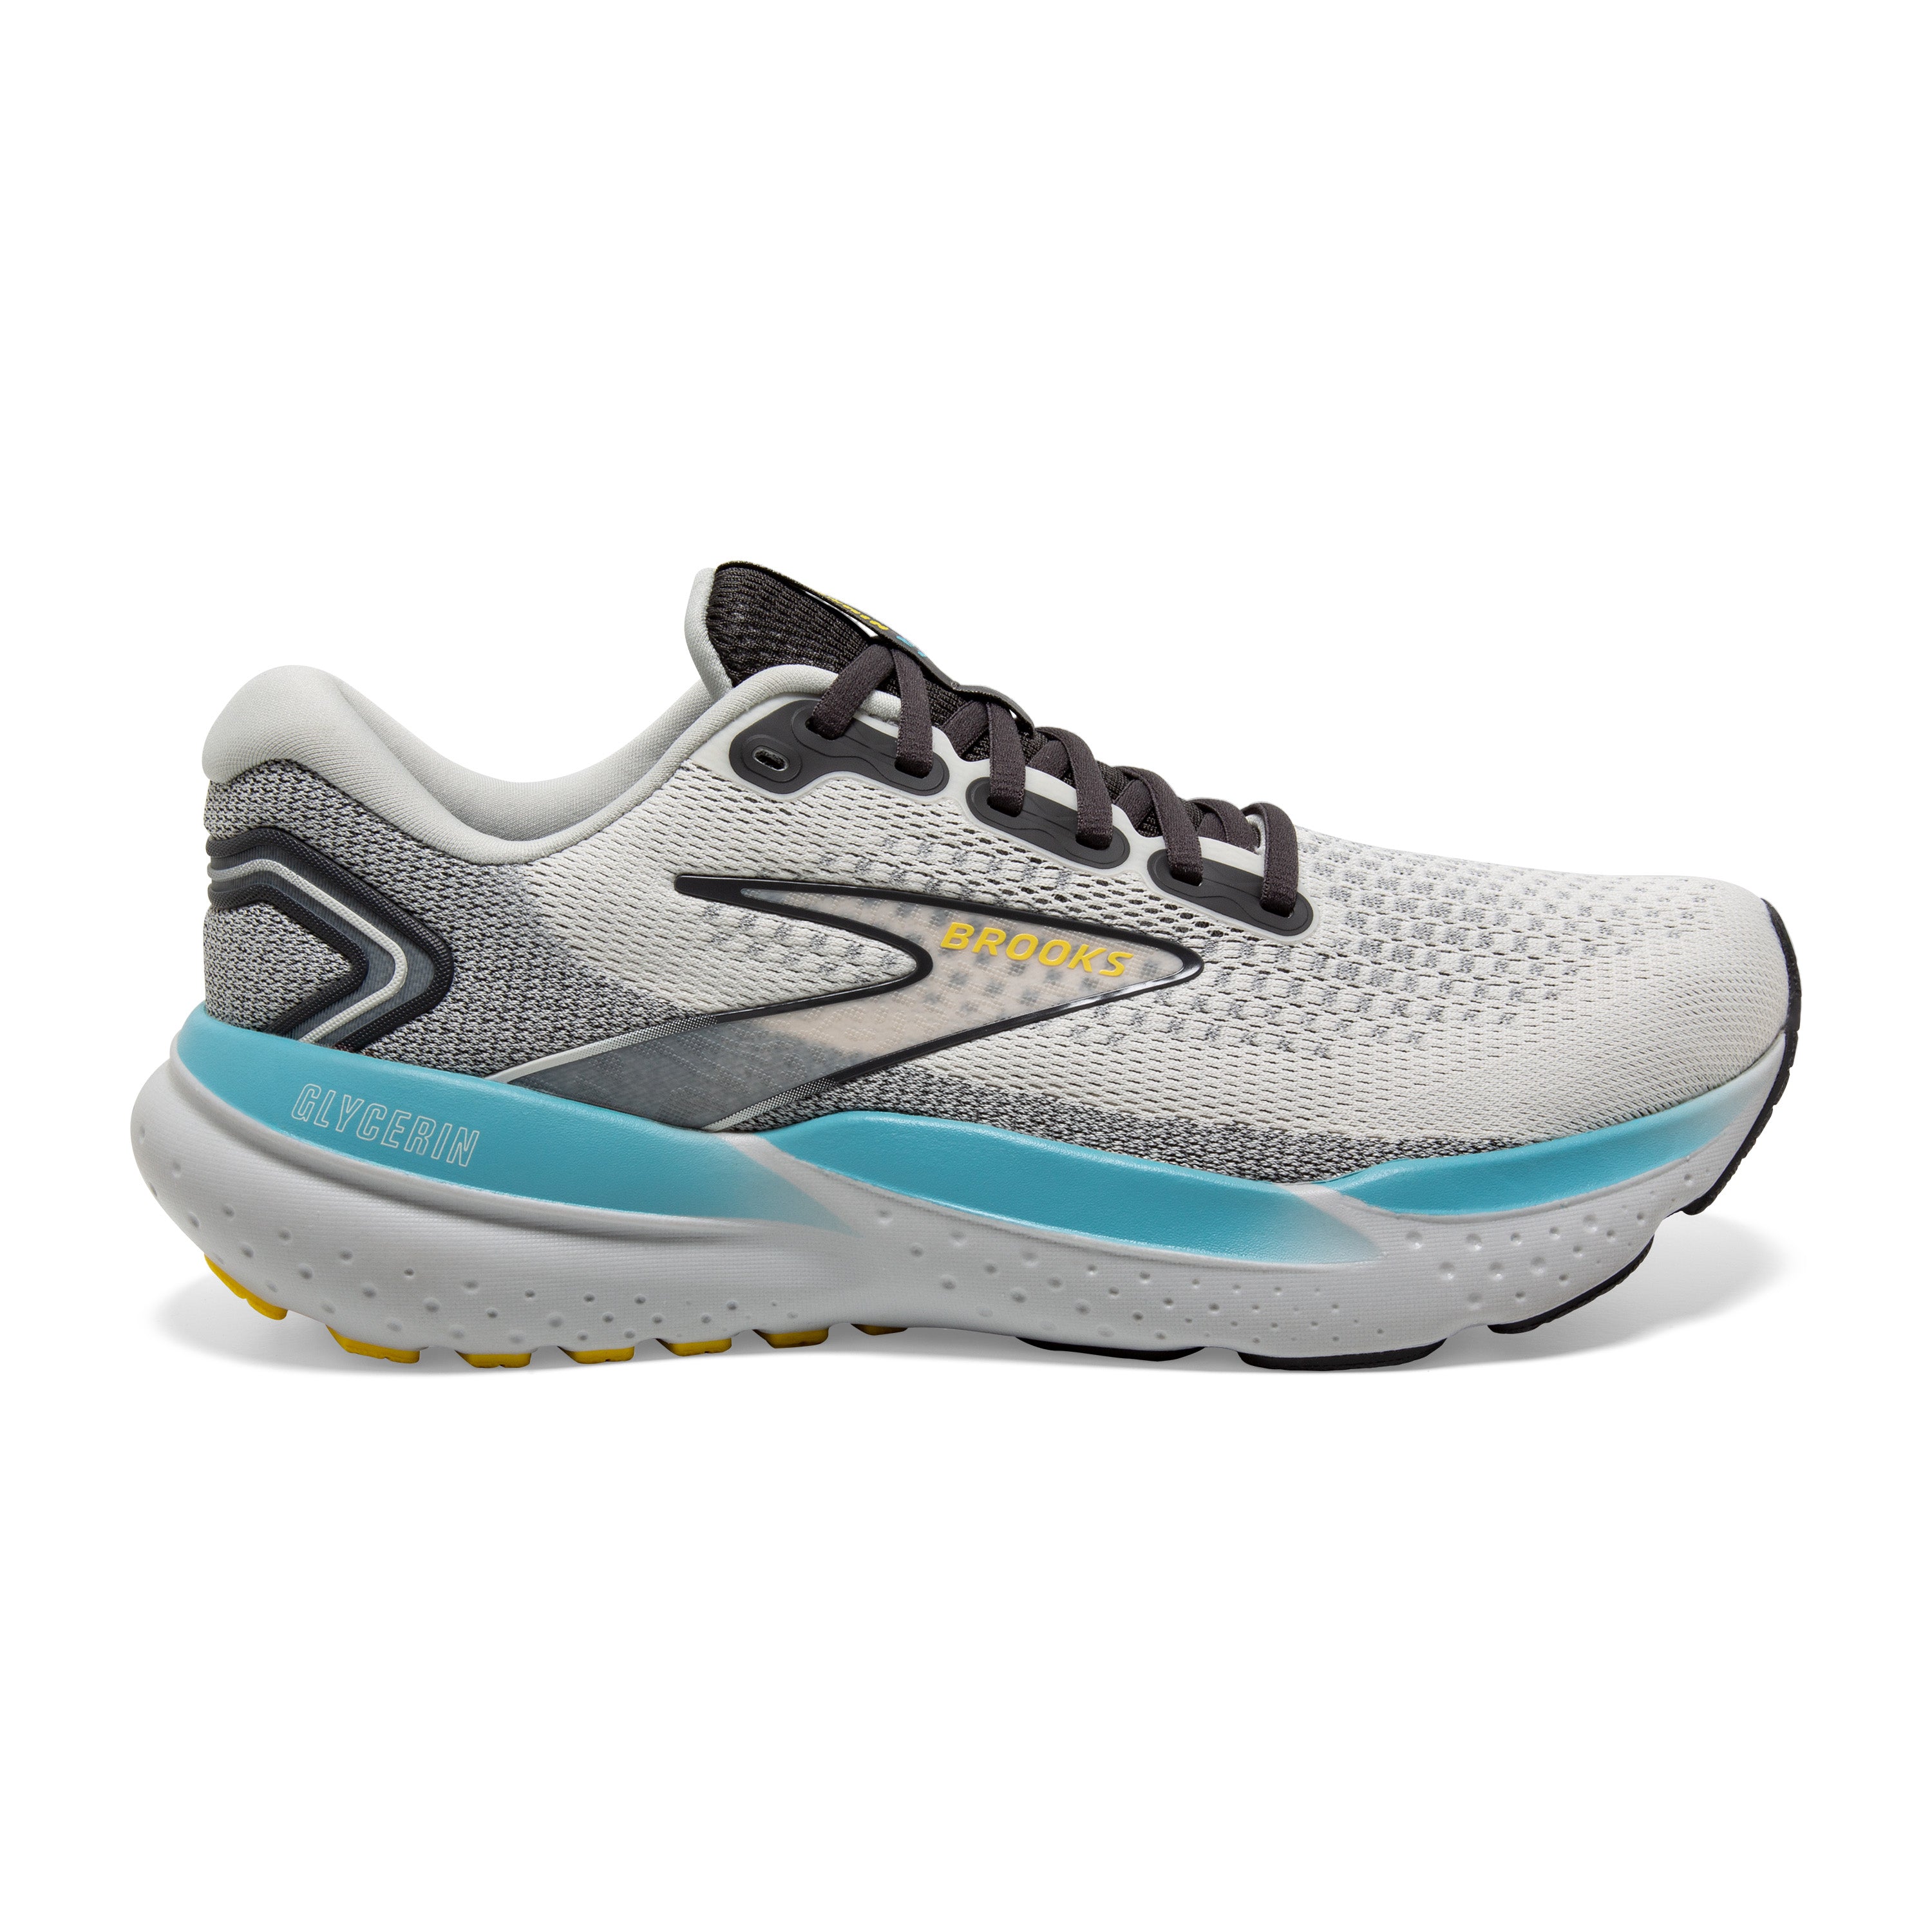 BROOKS MEN'S GLYCERIN 21 - D - 184 COCONUT/FORGED IRON/YELLOW 7.0